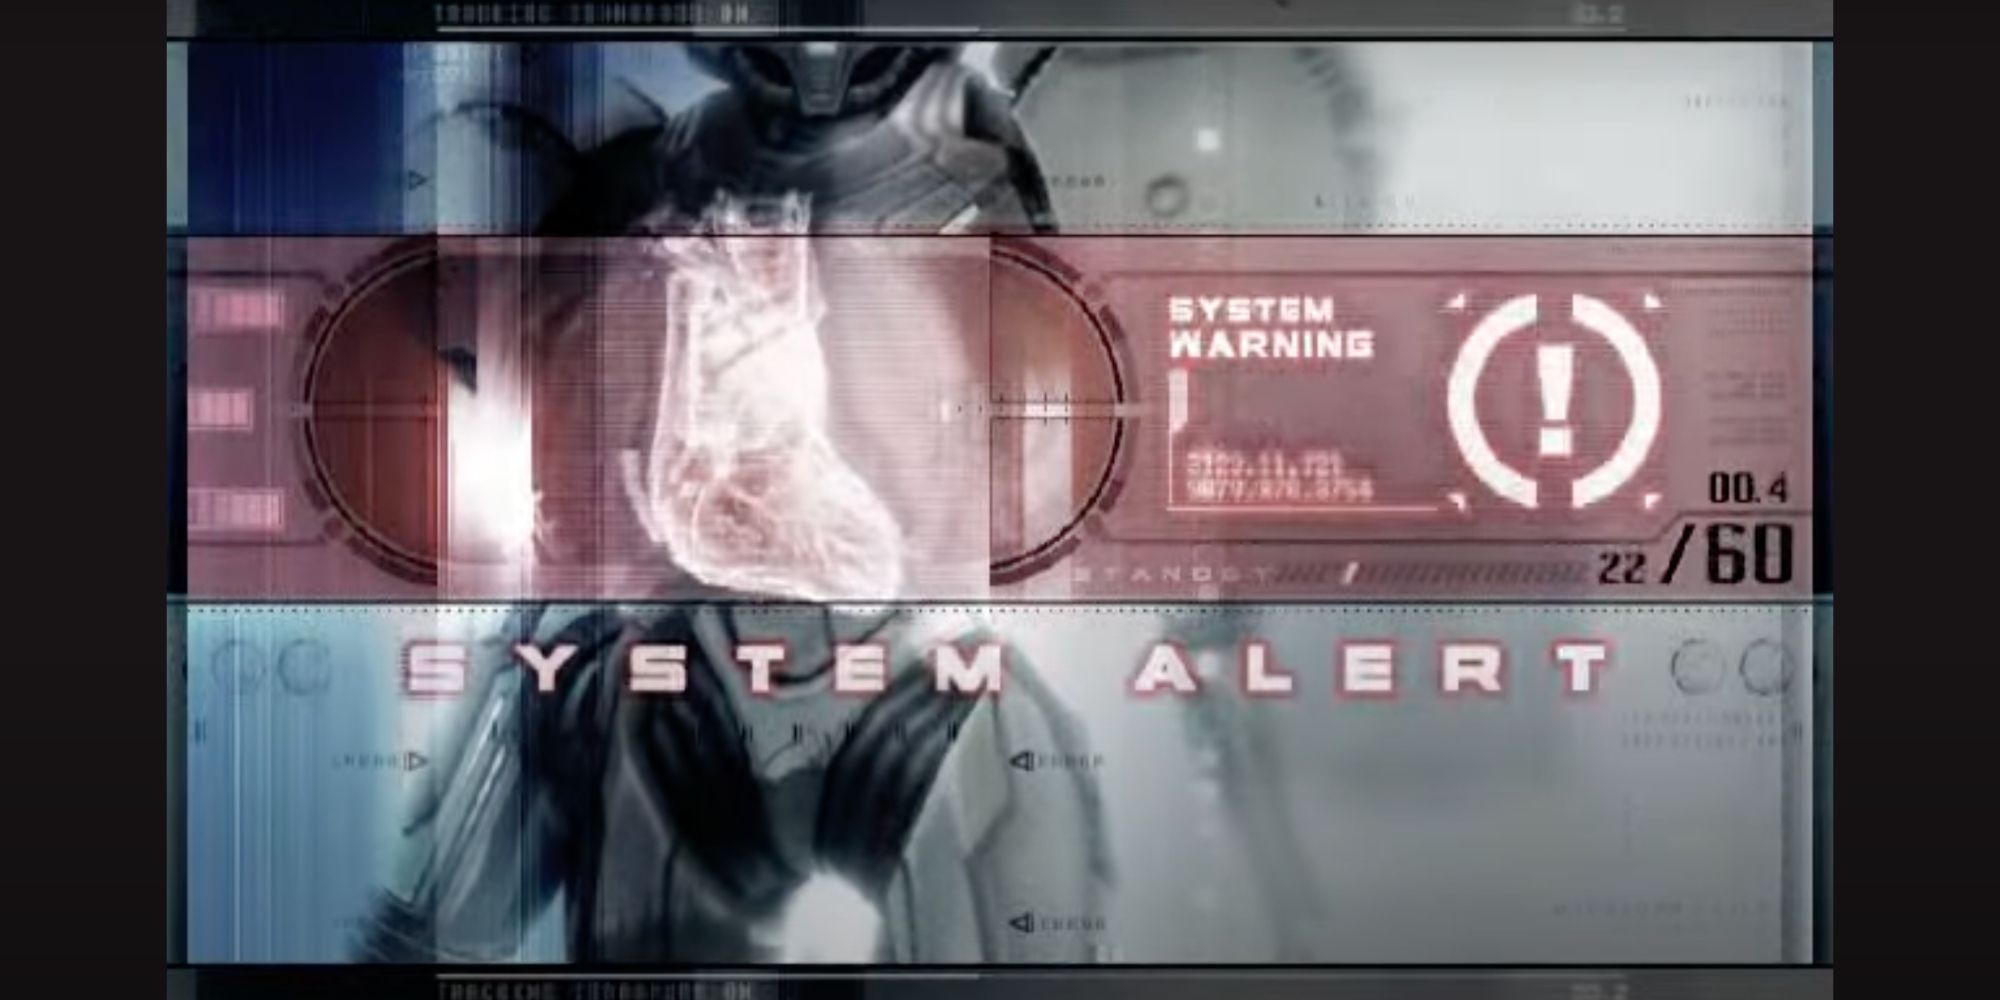 A system alert warning on the Metroid Prime 2 game over screen